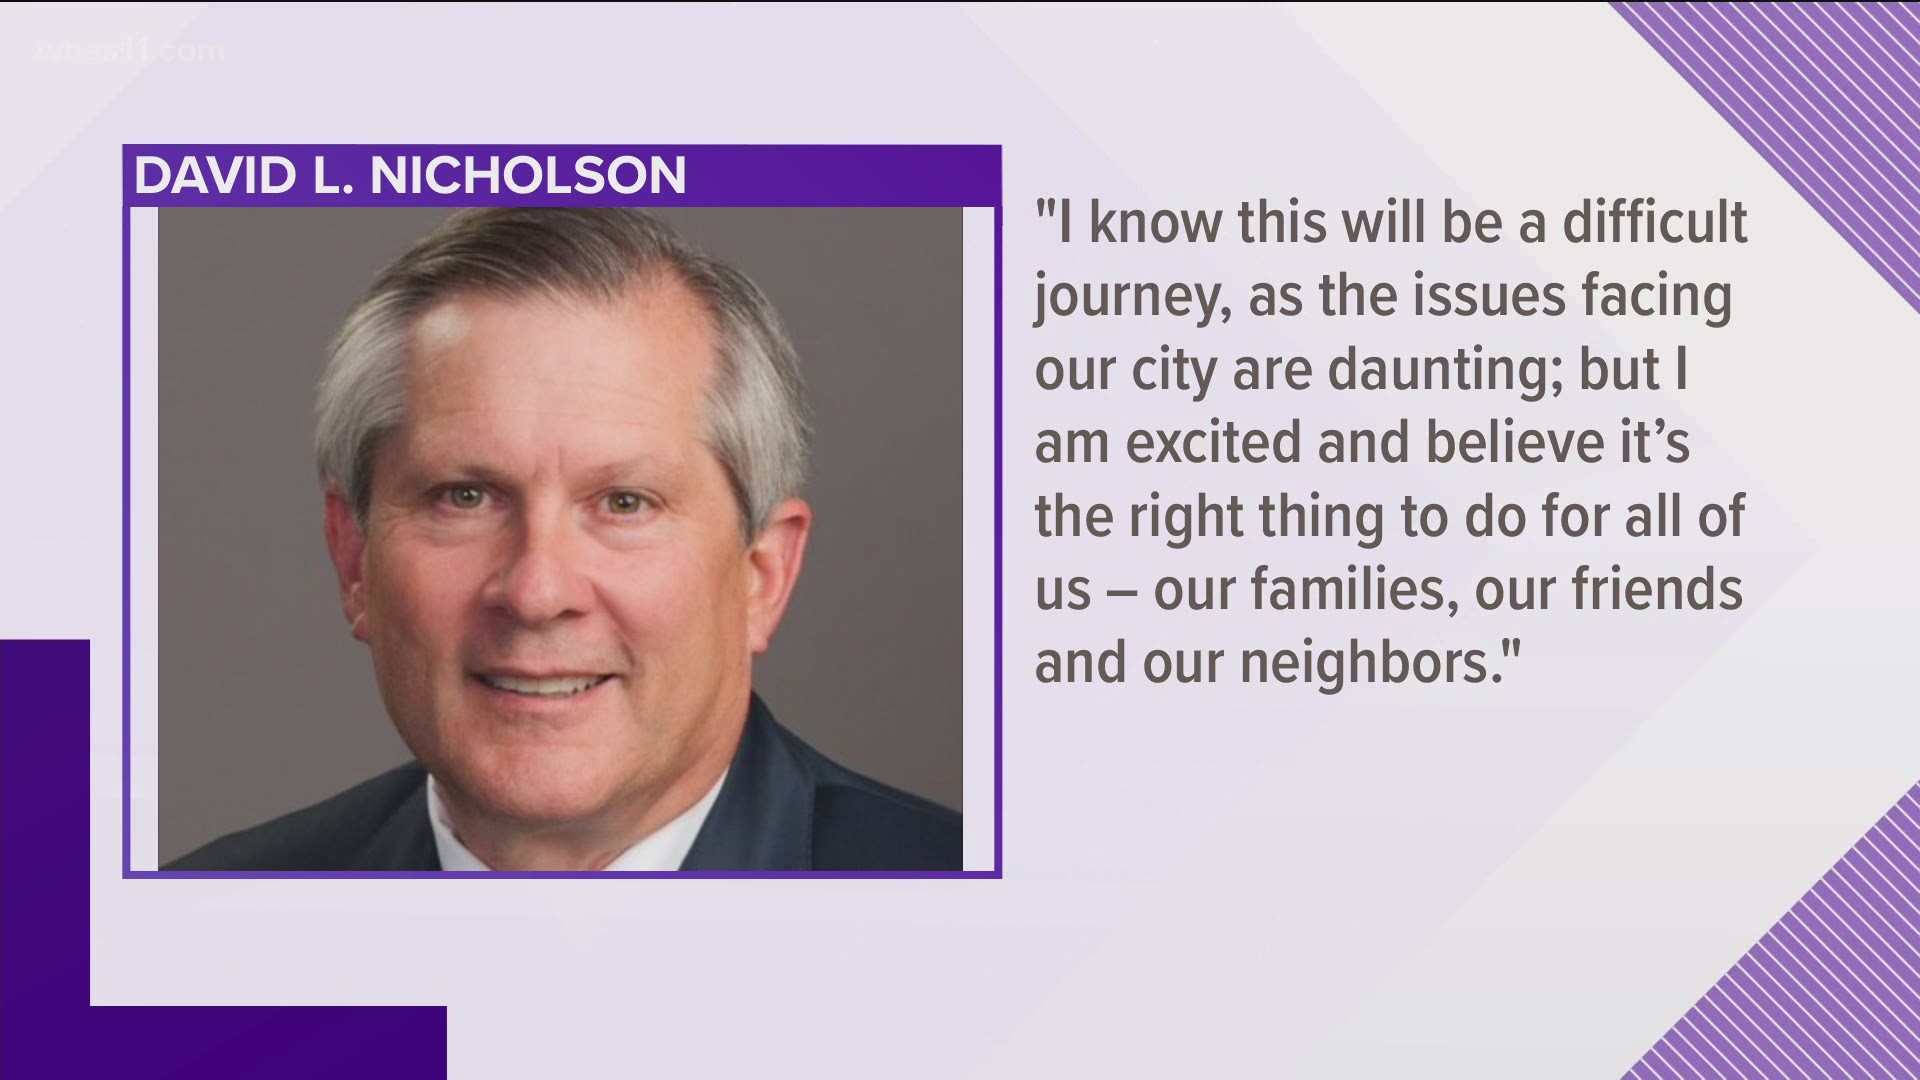 Jefferson County Circuit Court Clerk David Nicholson is joining a crowded field vying for mayor of Louisville.